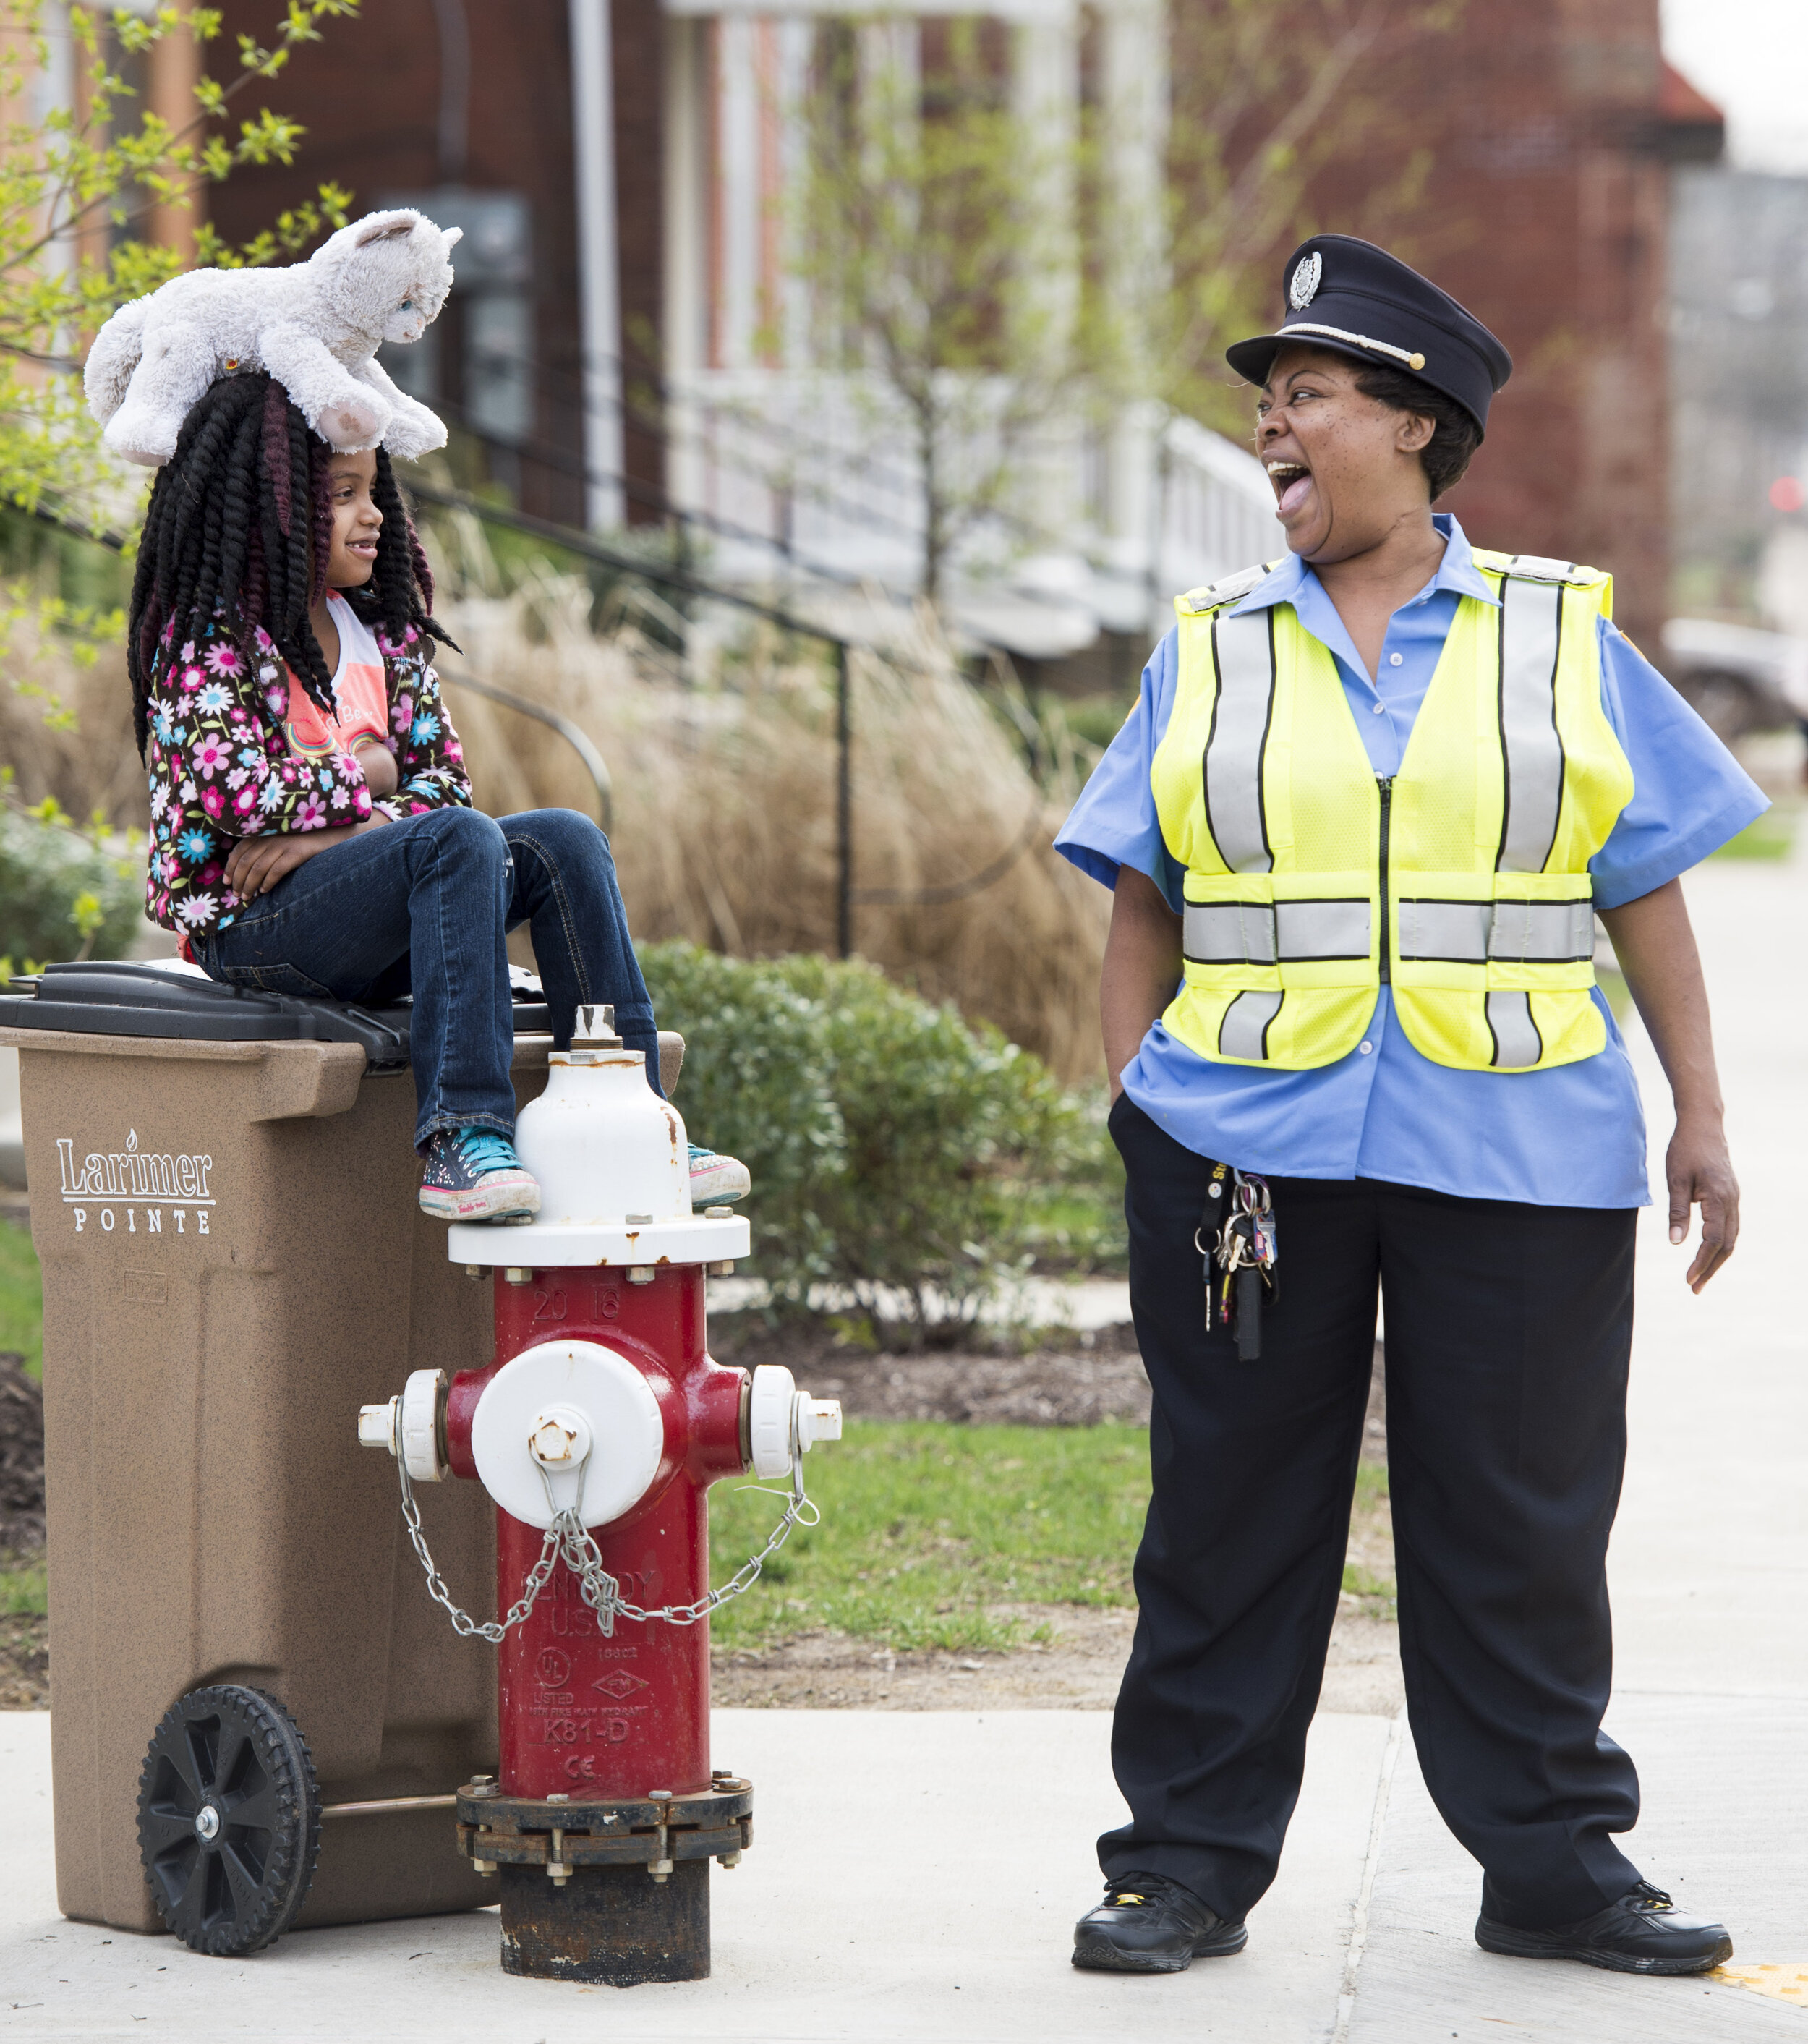  City of Pittsburgh crossing guard Carla Harris (right) laughs with Rhavyn Doubt, 7, and Doubt’s stuffed animal “Fluffy” as Doubt waits with her on Wednesday, April 18, 2018 at the corner of Meadow Street and Larimer Avenue in Larimer. “She’s a sweet